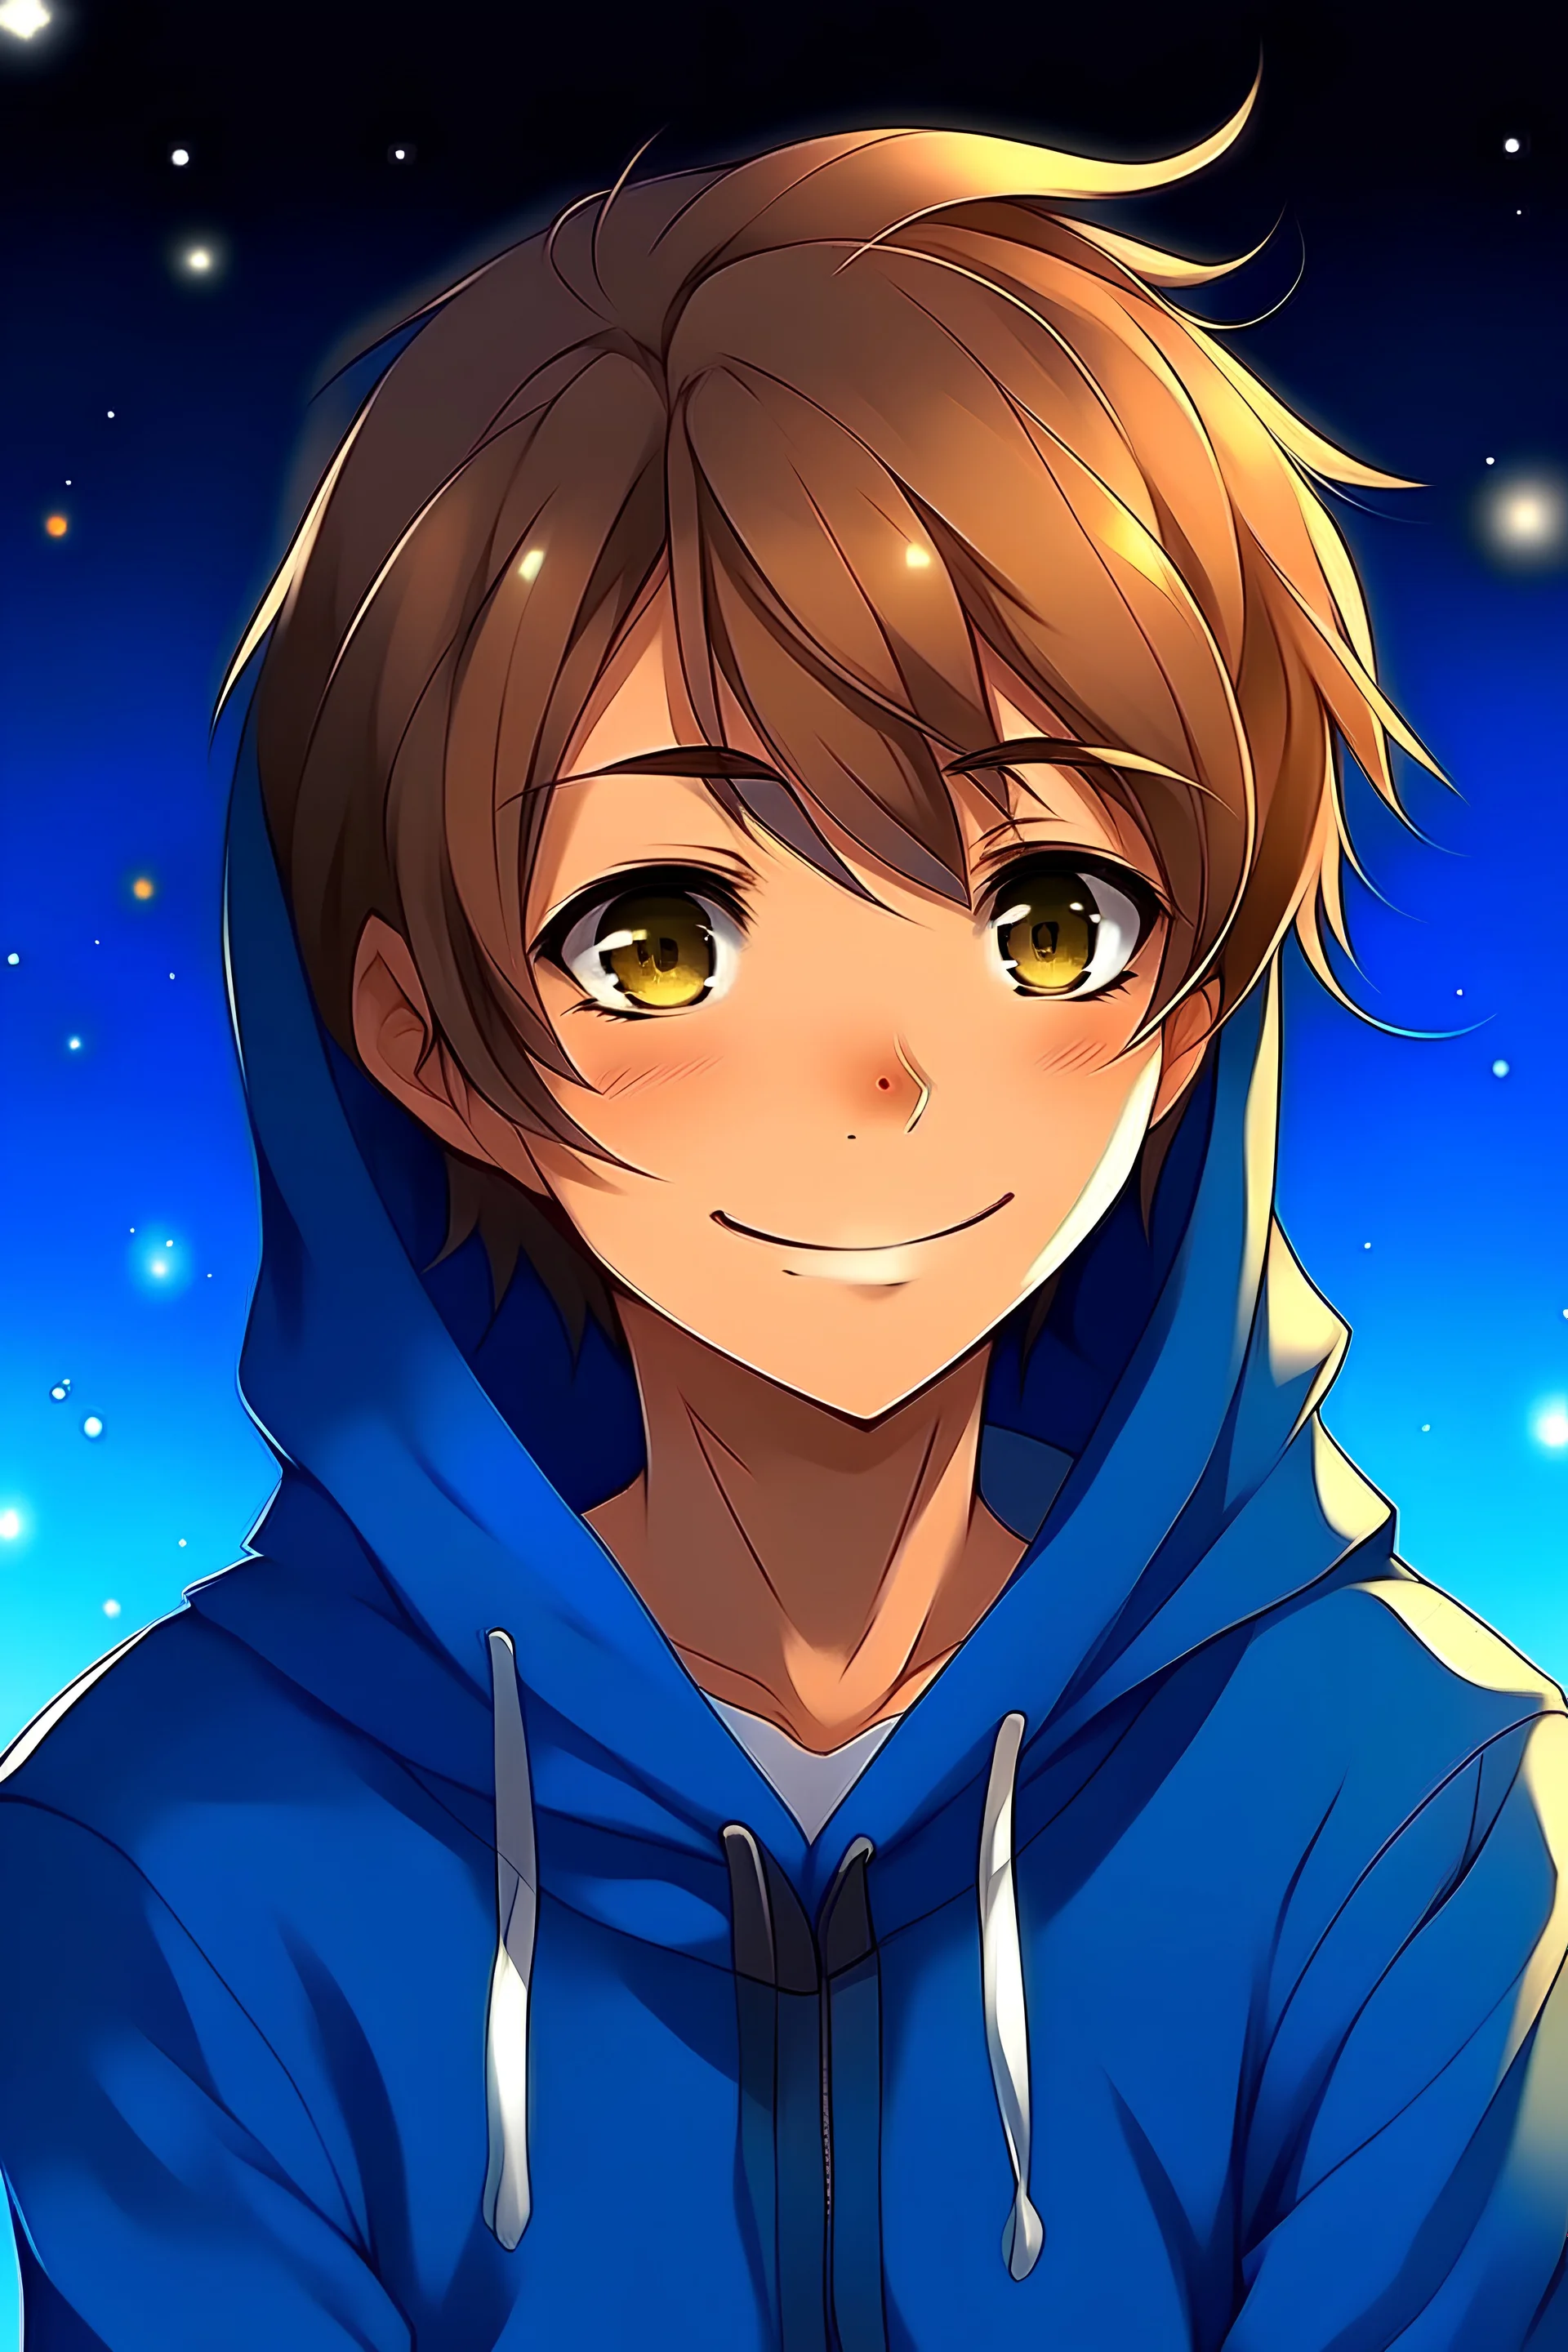 Brown hair anime boy with blue hoodie smiling face view starry night background